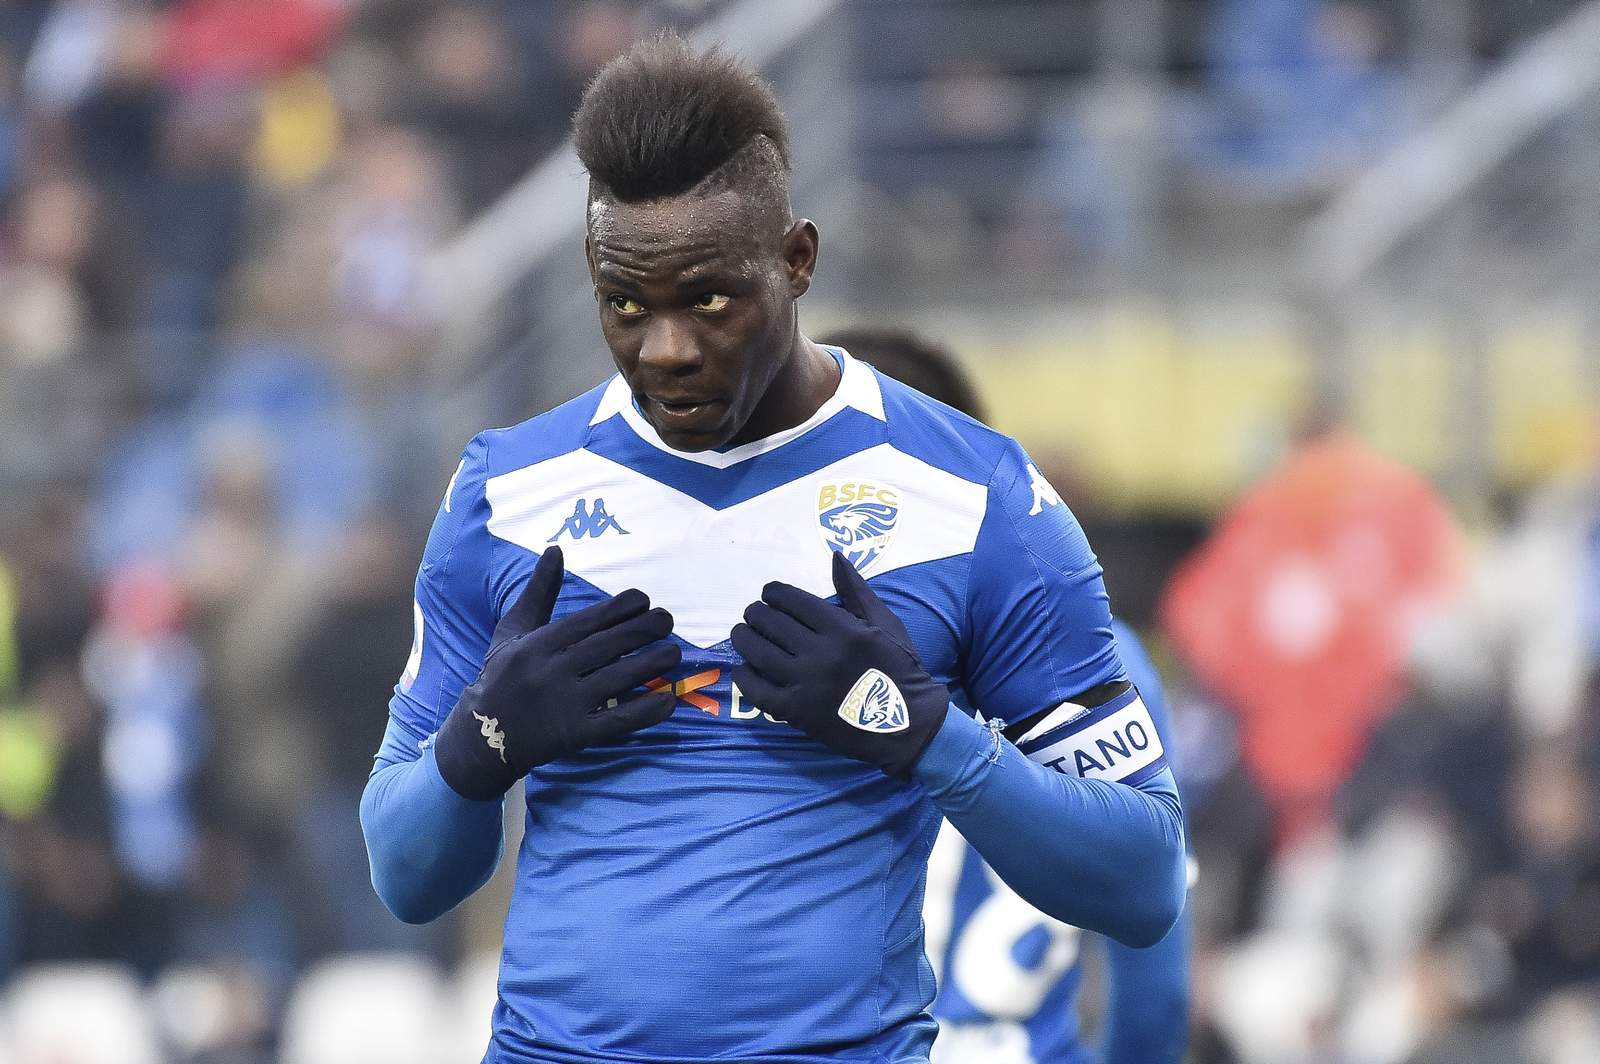 Balotelli reportedly fired by Brescia -- his hometown club